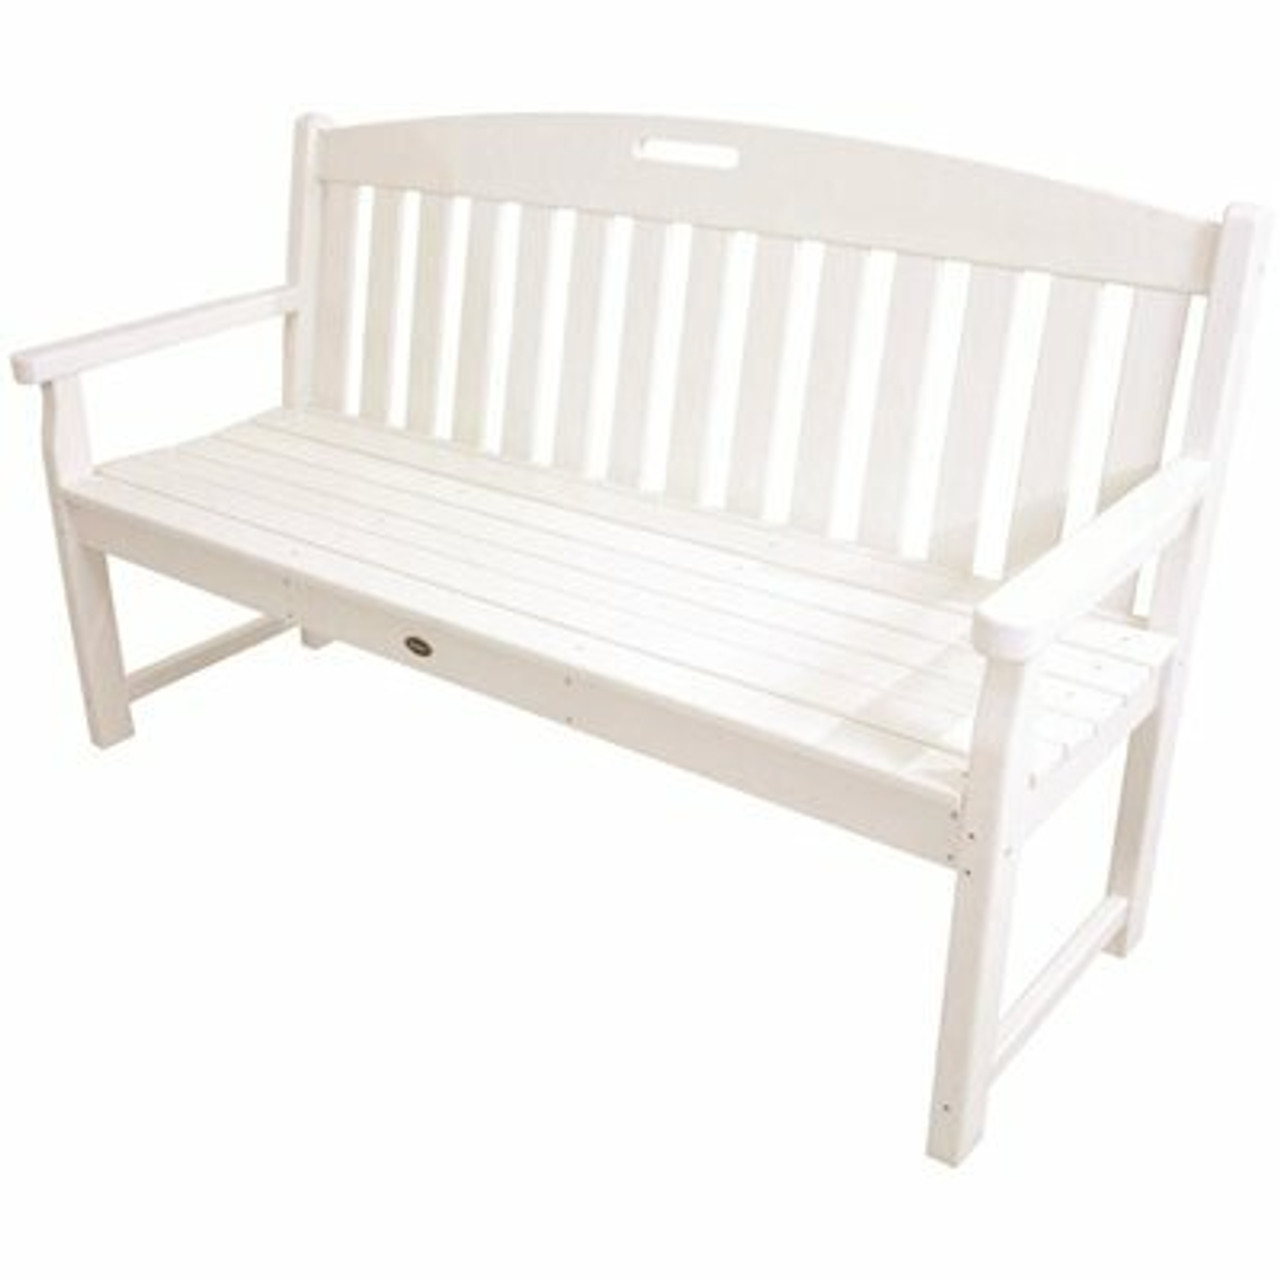 Trex Outdoor Furniture Yacht Club 60 In. Classic White Plastic Patio Bench